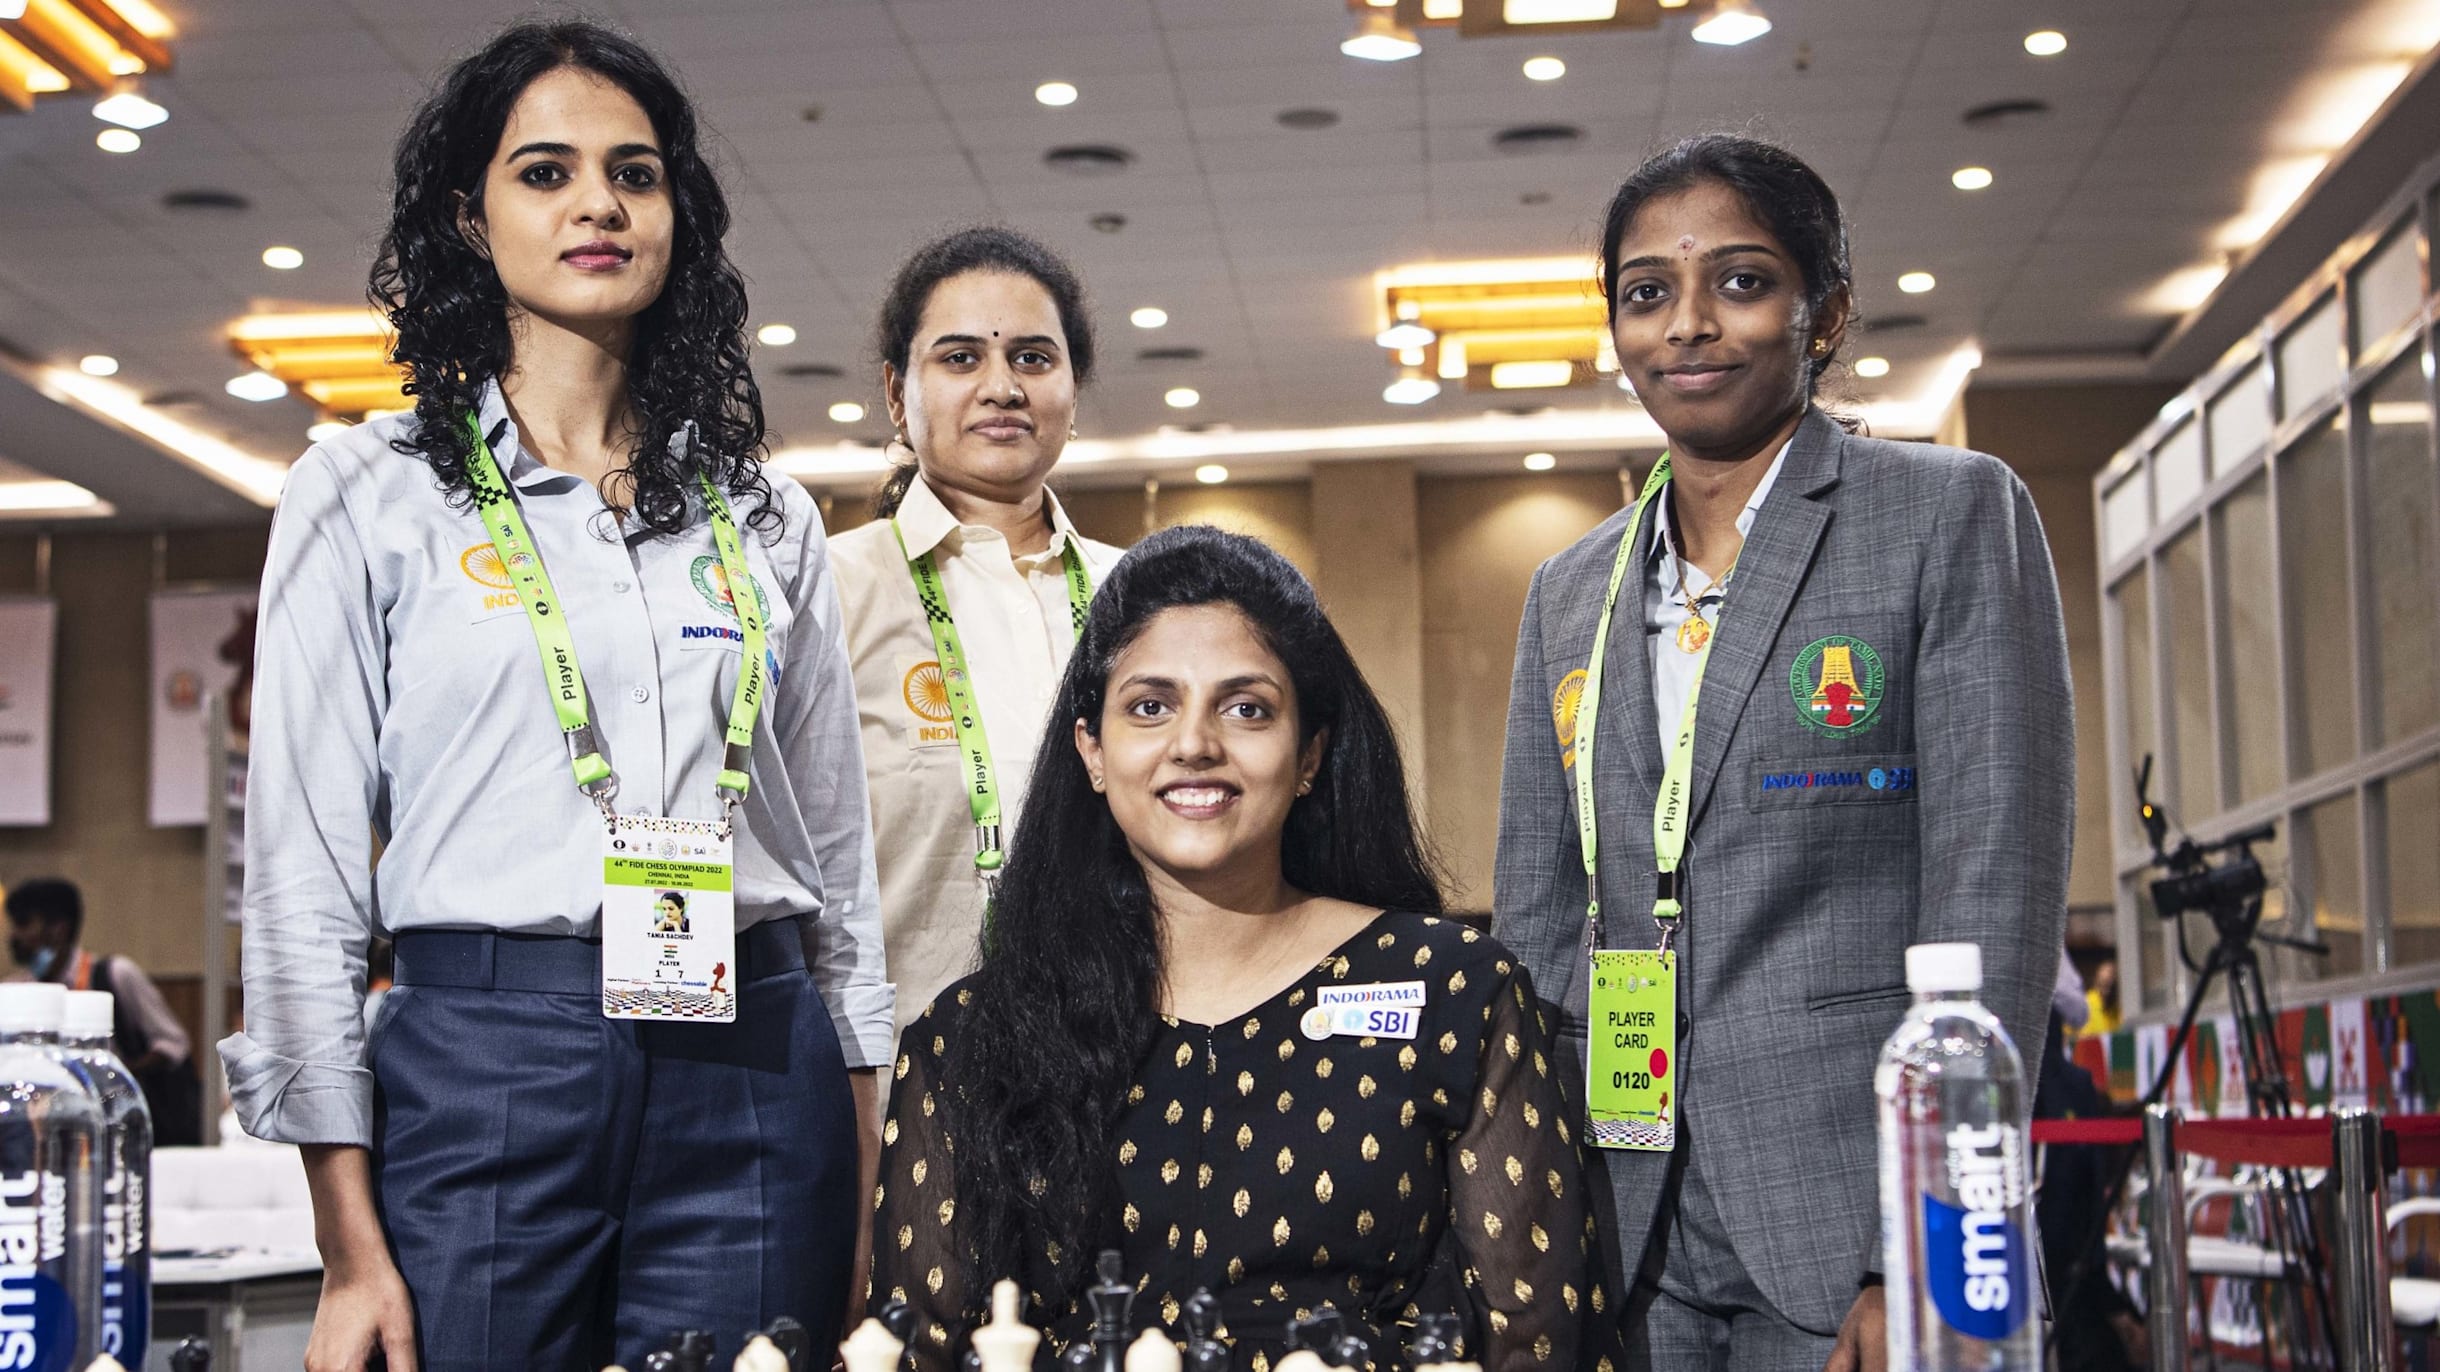 FIDE Chess Olympiad 2022: All Indian medal winners